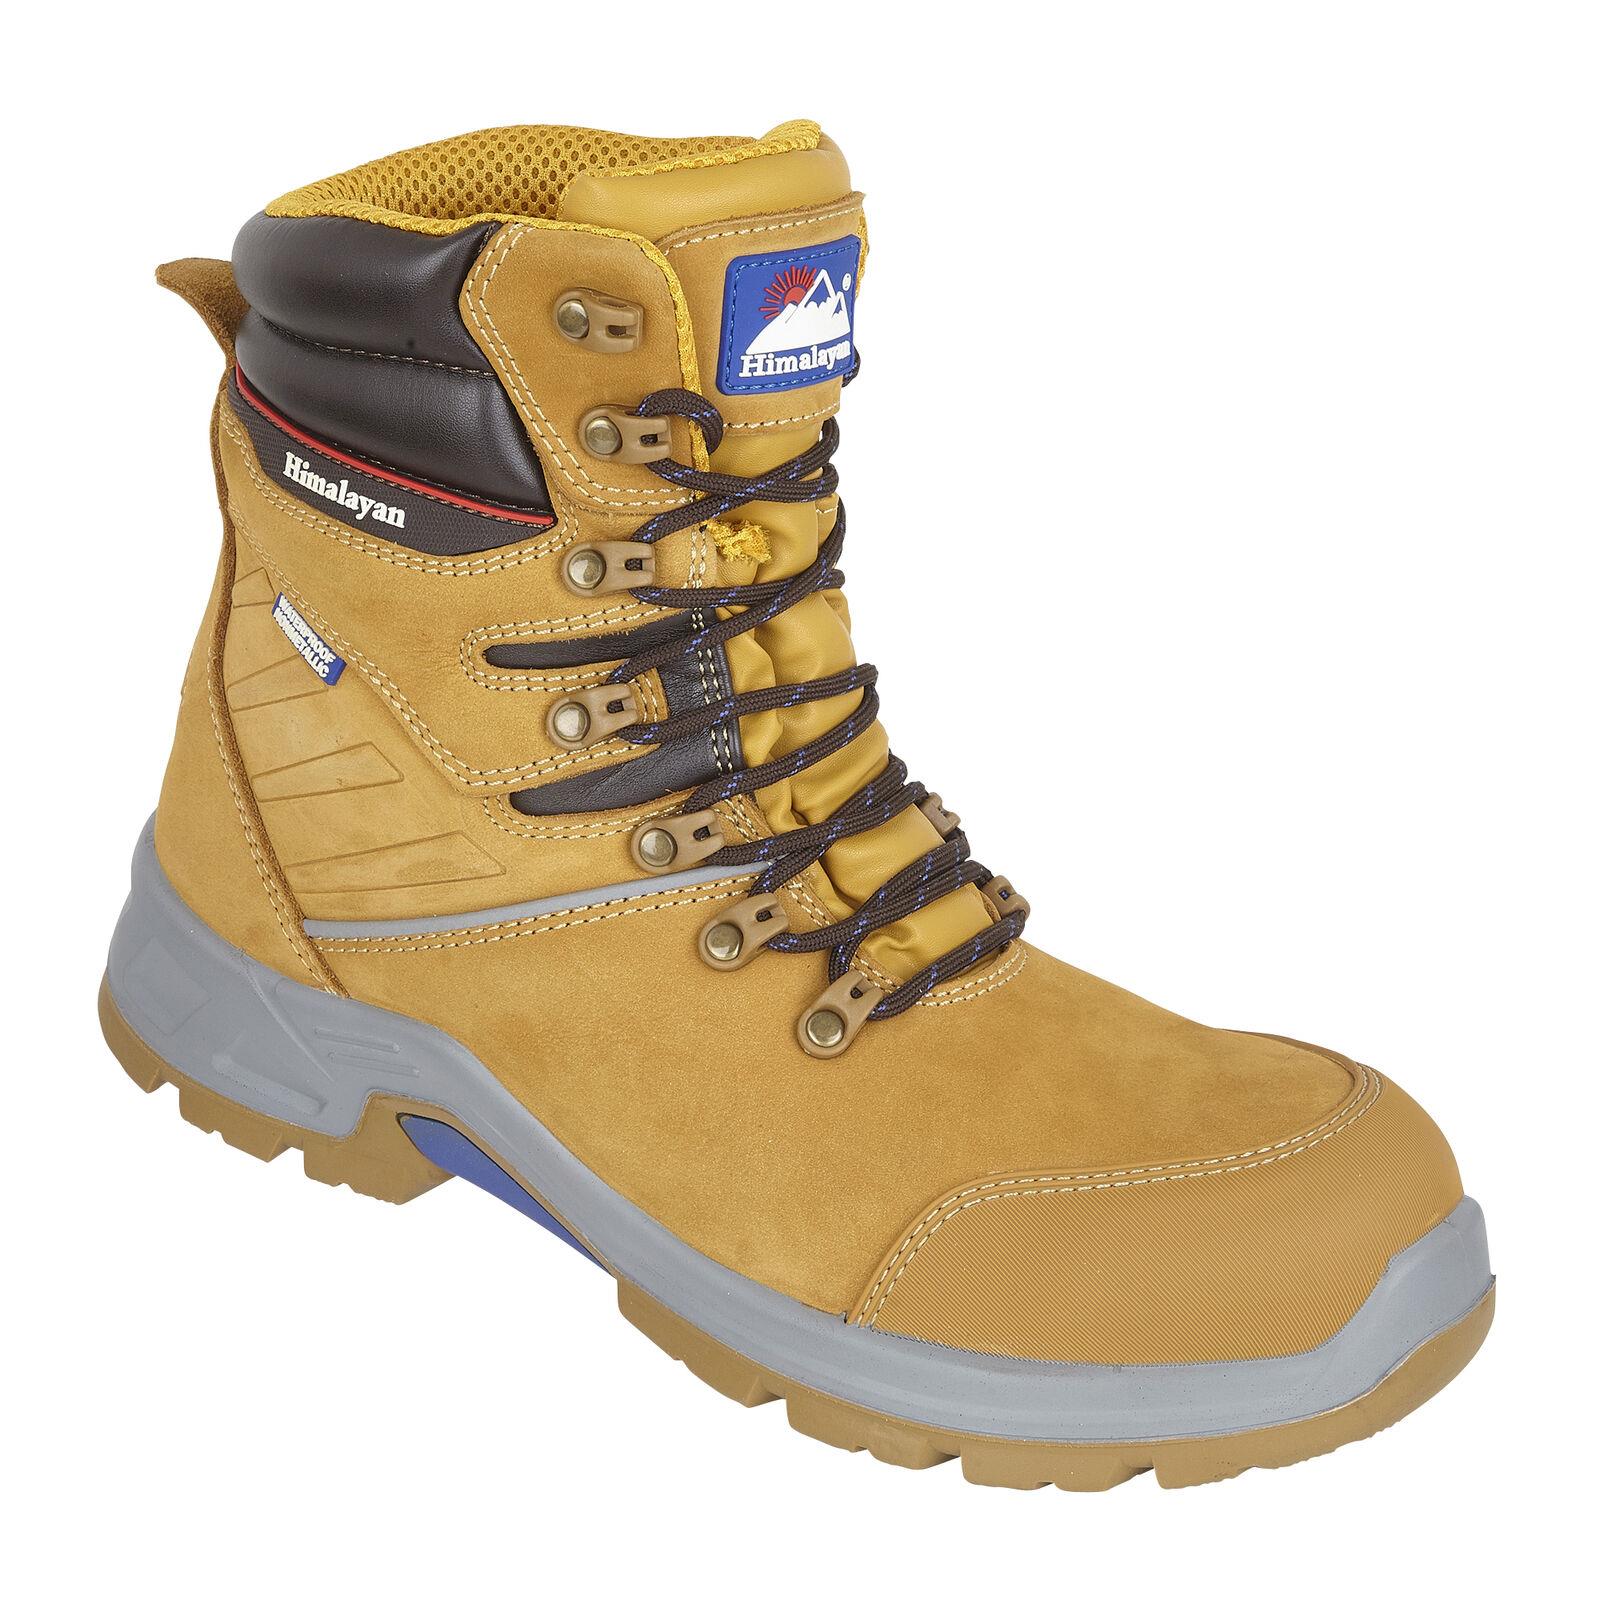 Himalayan Storm S3 honey non-metal composite toe/midsole safety boot #5211